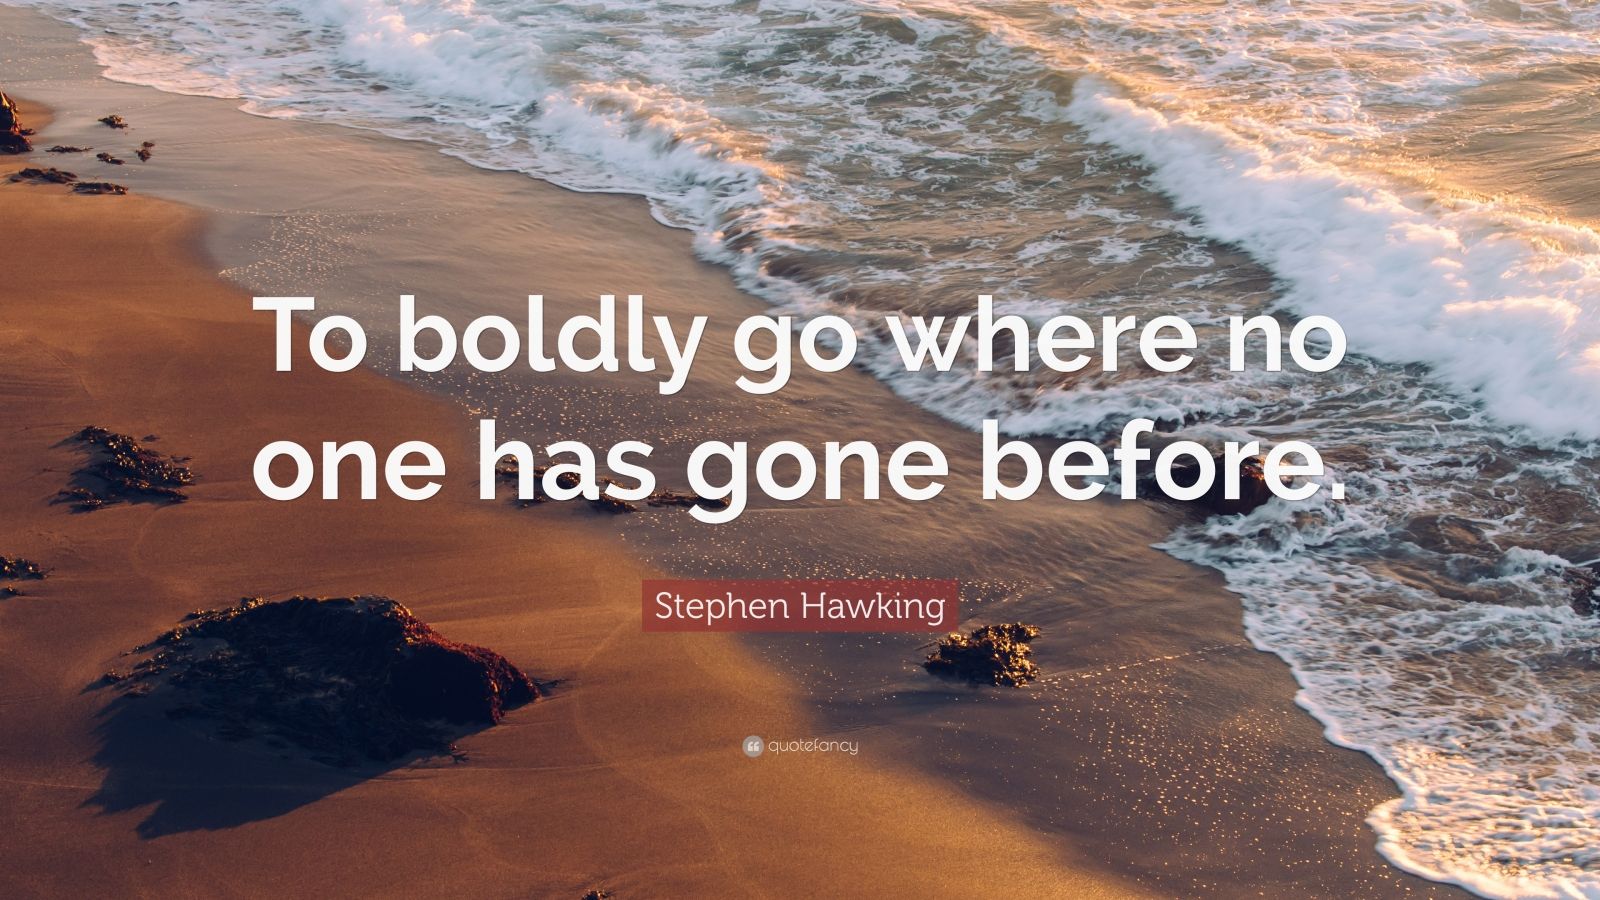 Stephen Hawking Quote “to Boldly Go Where No One Has Gone Before” 12 Wallpapers Quotefancy 3654